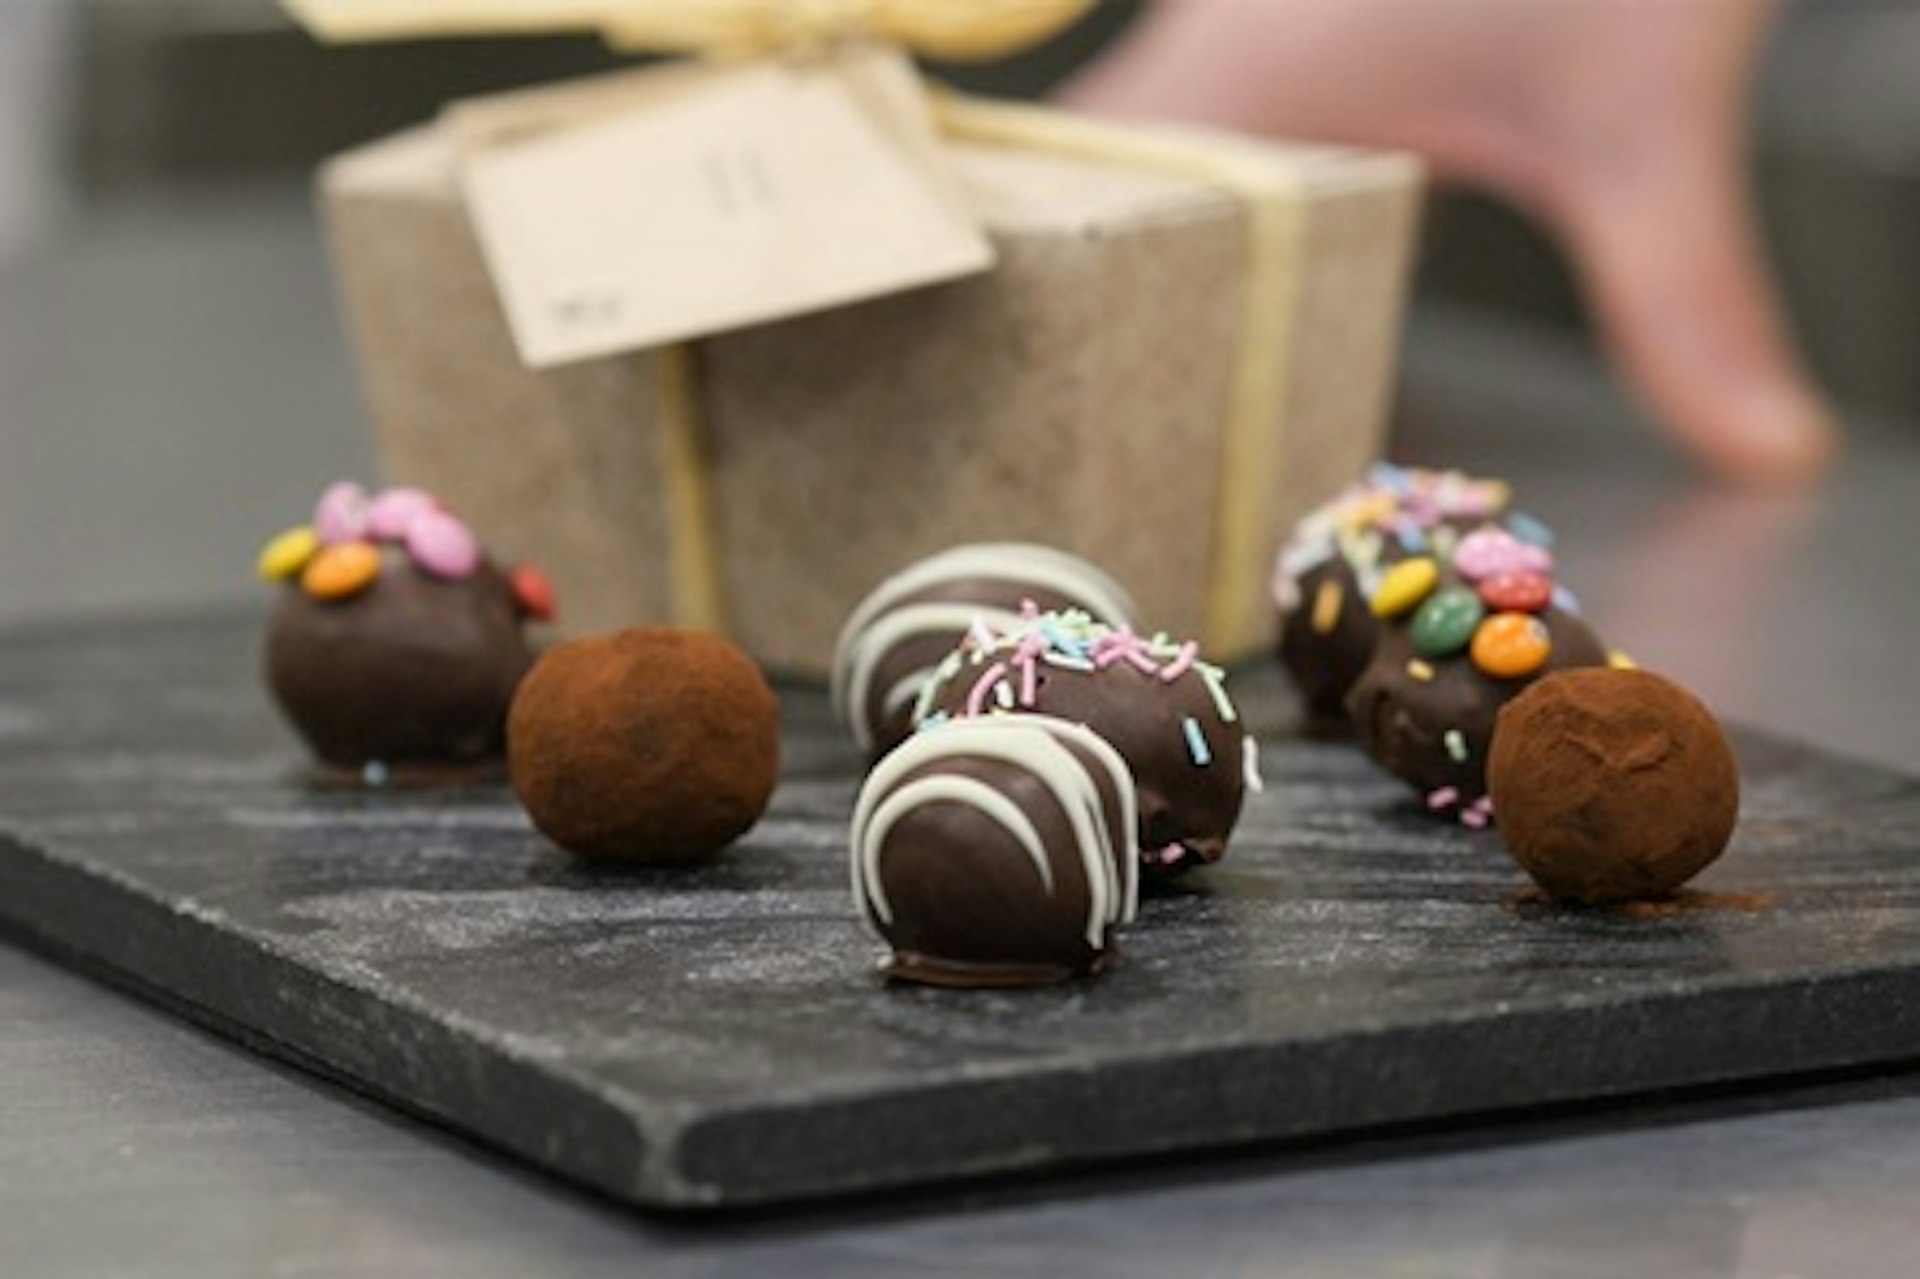 Introduction to Chocolate Making at York Cocoa Works 2